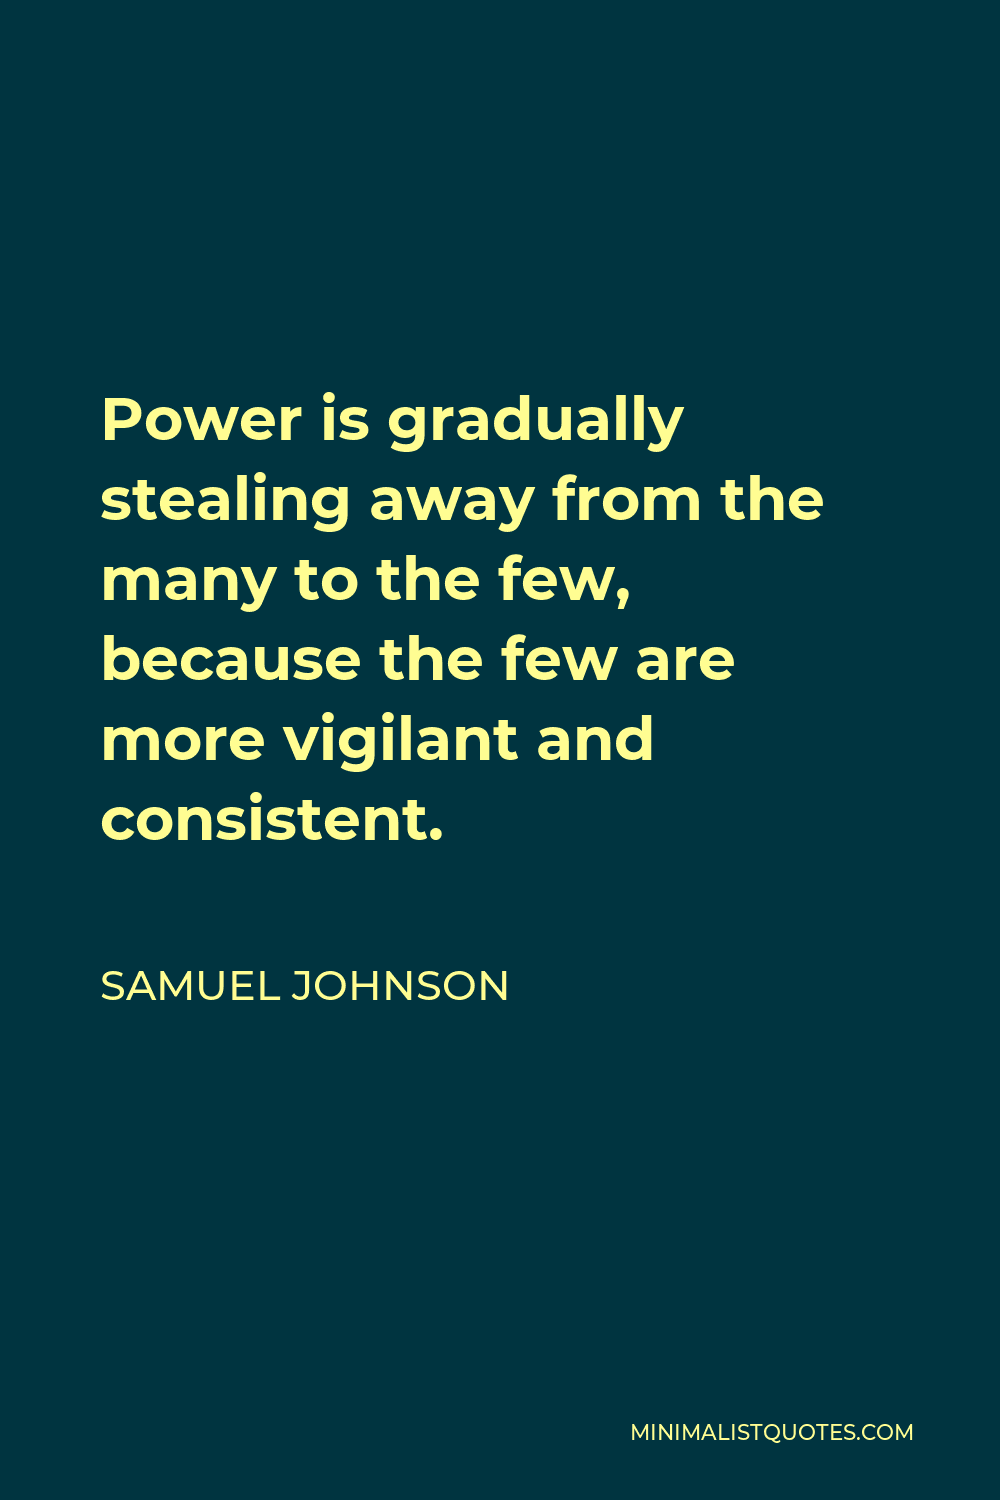 Samuel Johnson Quote - Power is gradually stealing away from the many to the few, because the few are more vigilant and consistent.